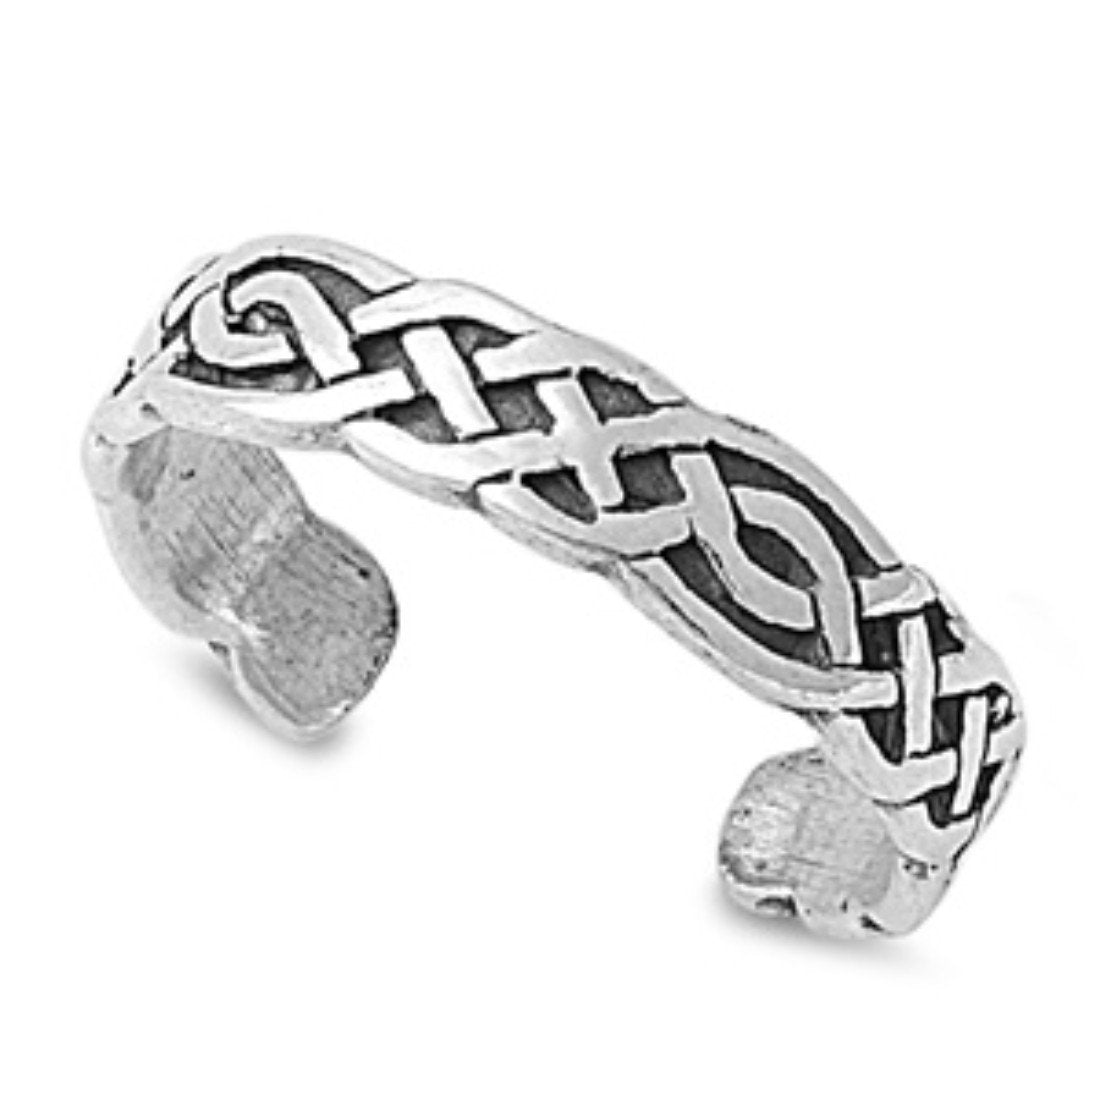 Adjustable Celtic Silver Toe Ring Band 925 Sterling Silver (4mm)